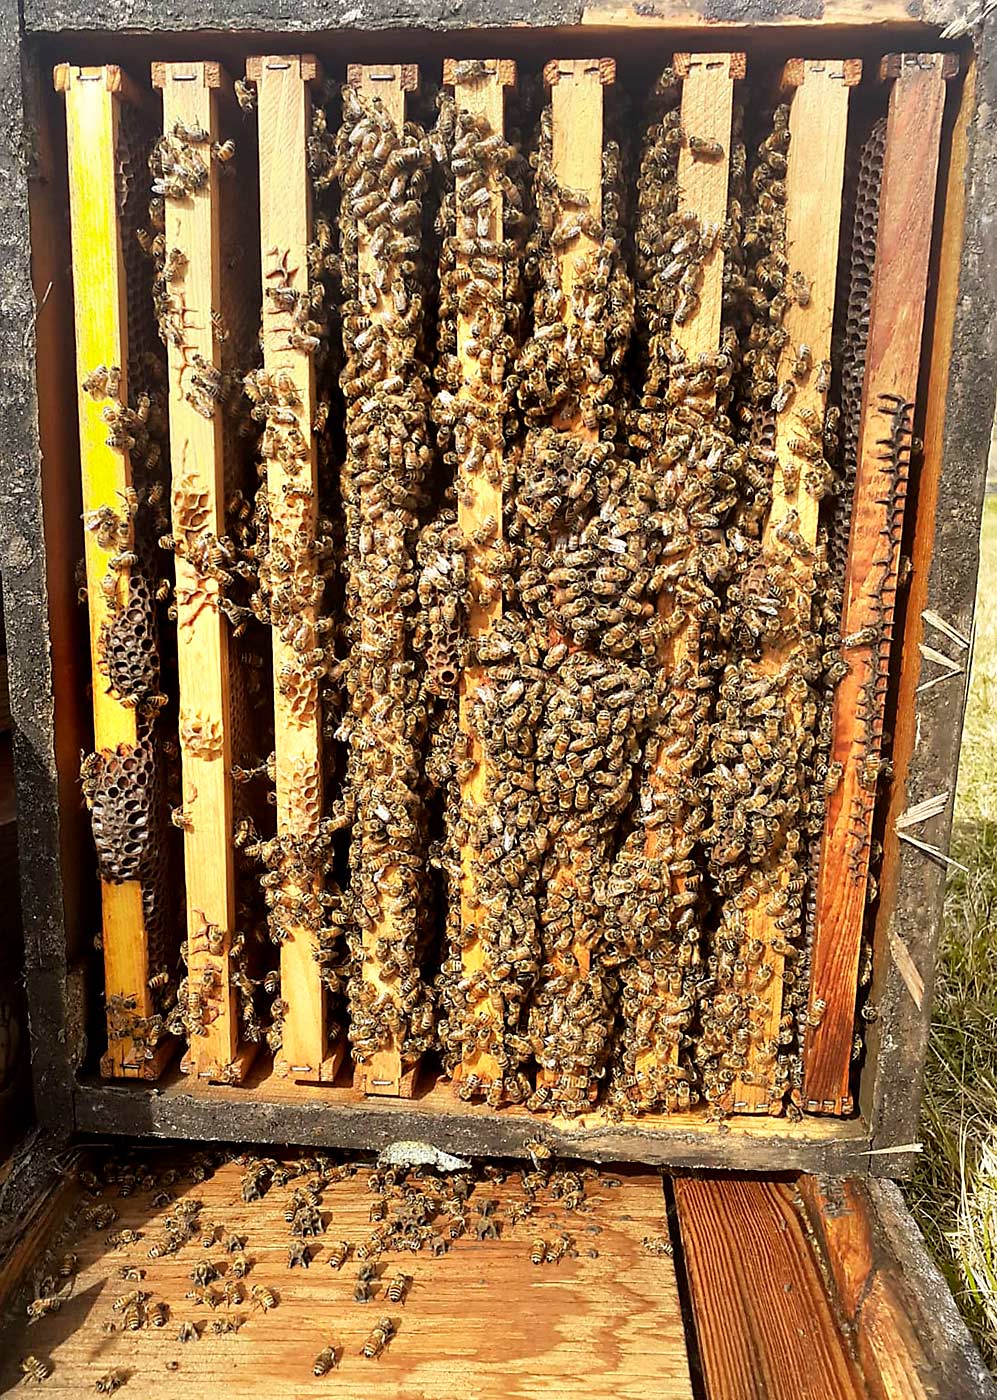 University of Florida assistant professor Rachel Mallinger’s research team opens up honey bee hives to count bee clusters as part of their blueberry pollination research. Counting bee clusters is one way to measure hive quality. (Courtesy Rachel Mallinger/University of Florida)